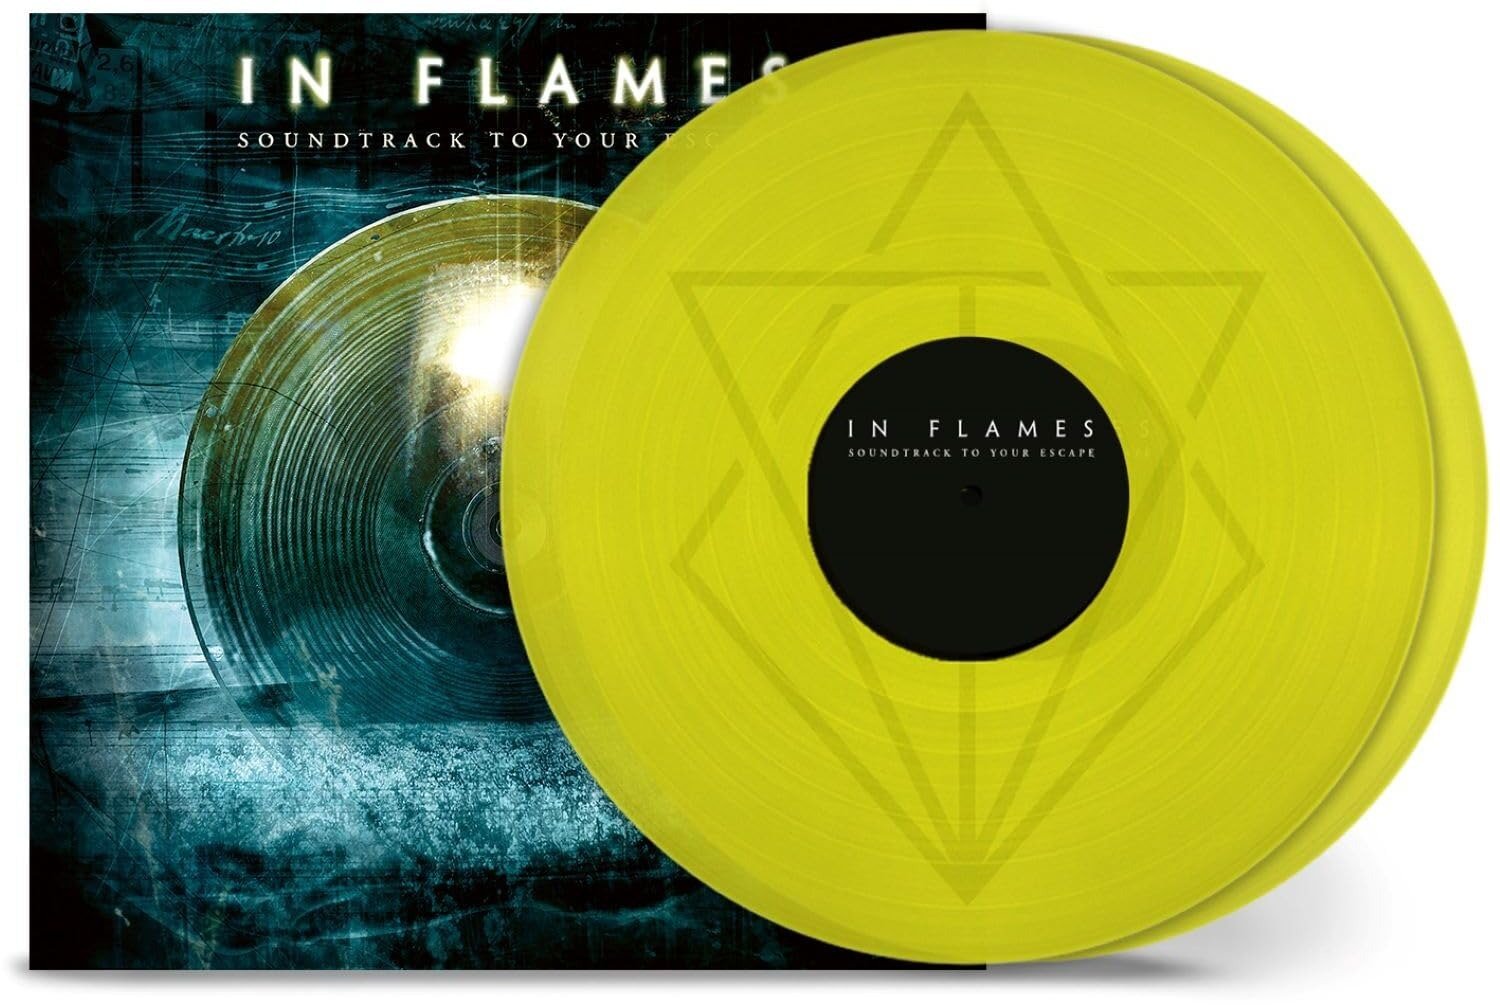 CD Shop - IN FLAMES SOUNDTRACK TO YOUR ESCAPE (20TH ANNIVERSARY)